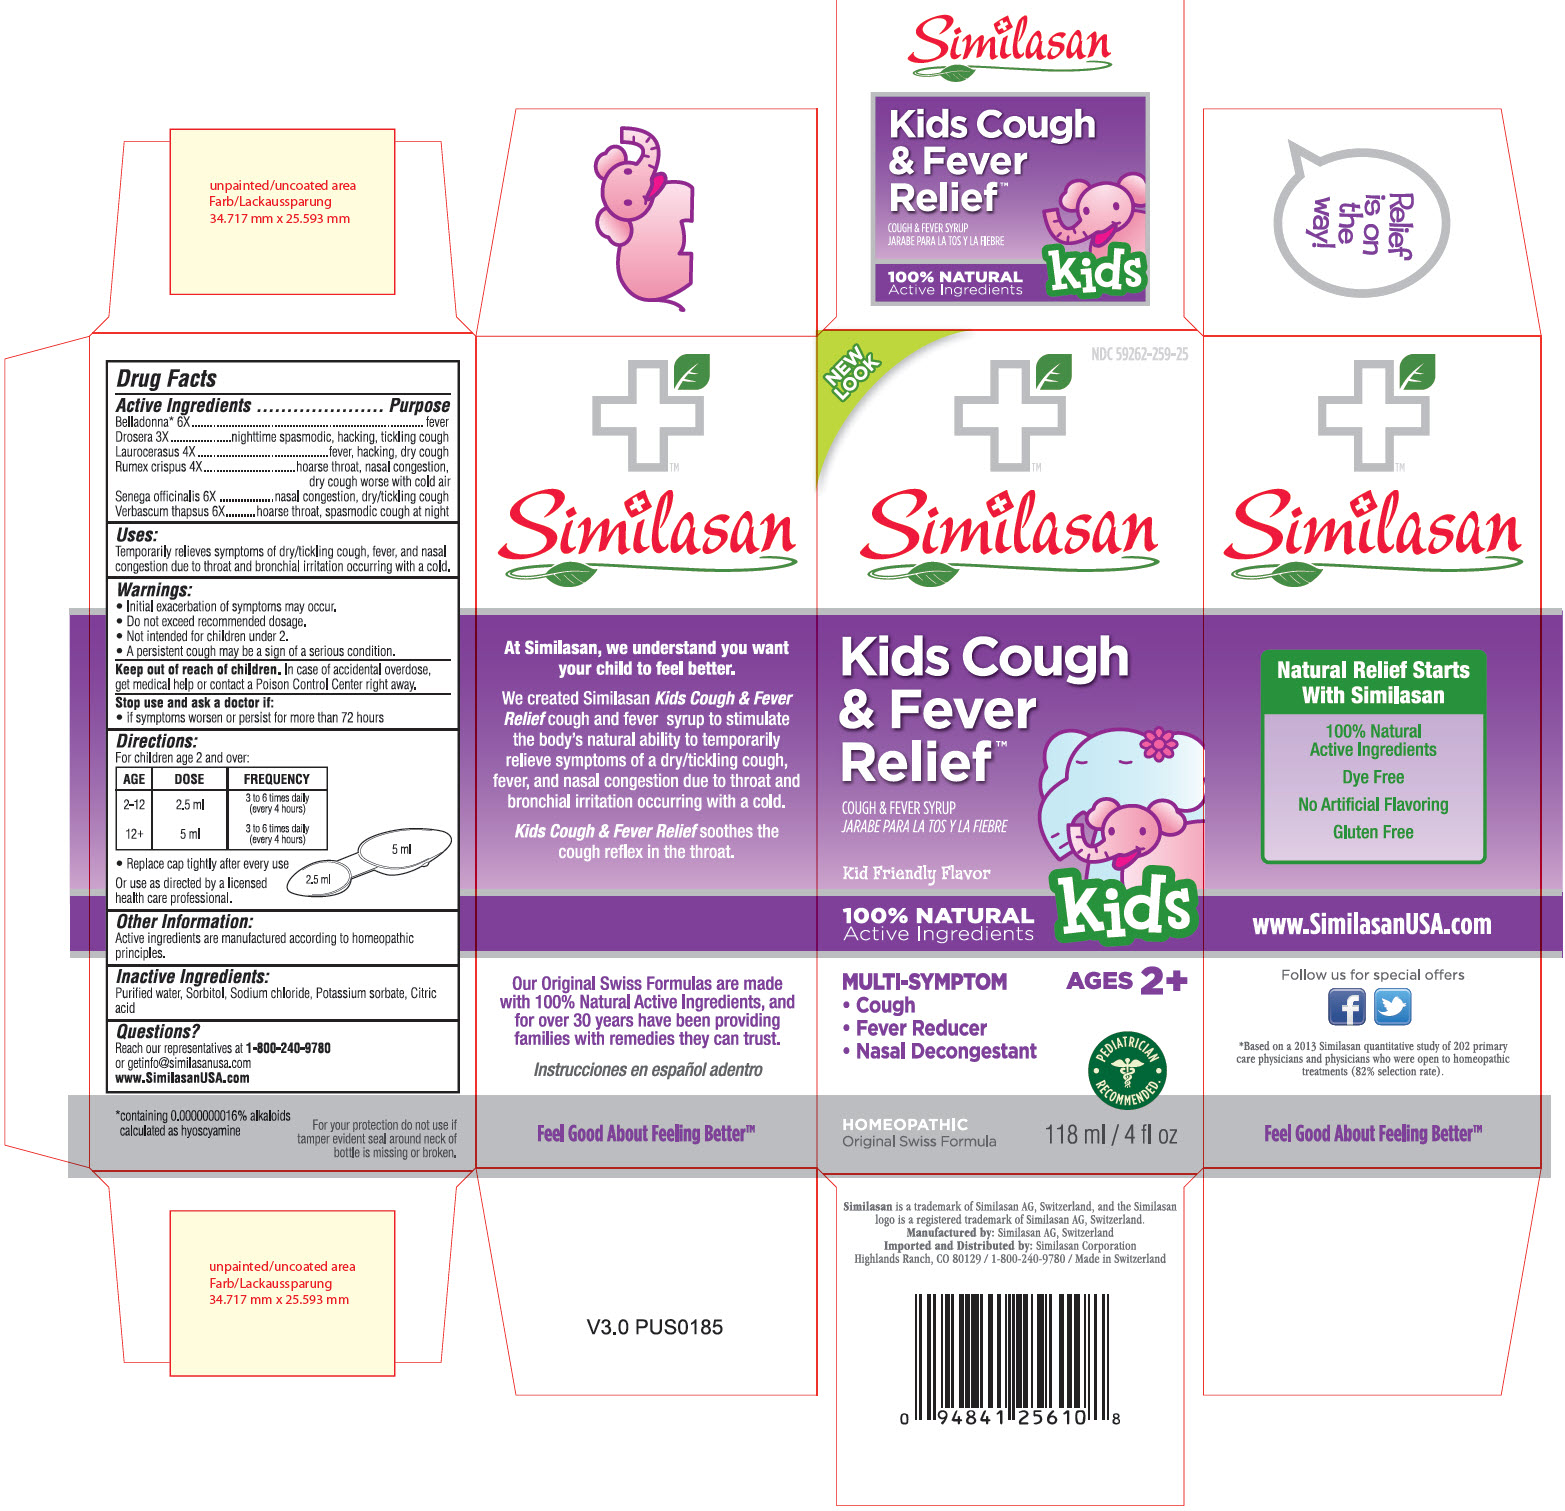 NDC 59262-259-25 Similasan Kids Cough & Fever Relief Cough & Fever Syrup 118 ml / 4fl oz